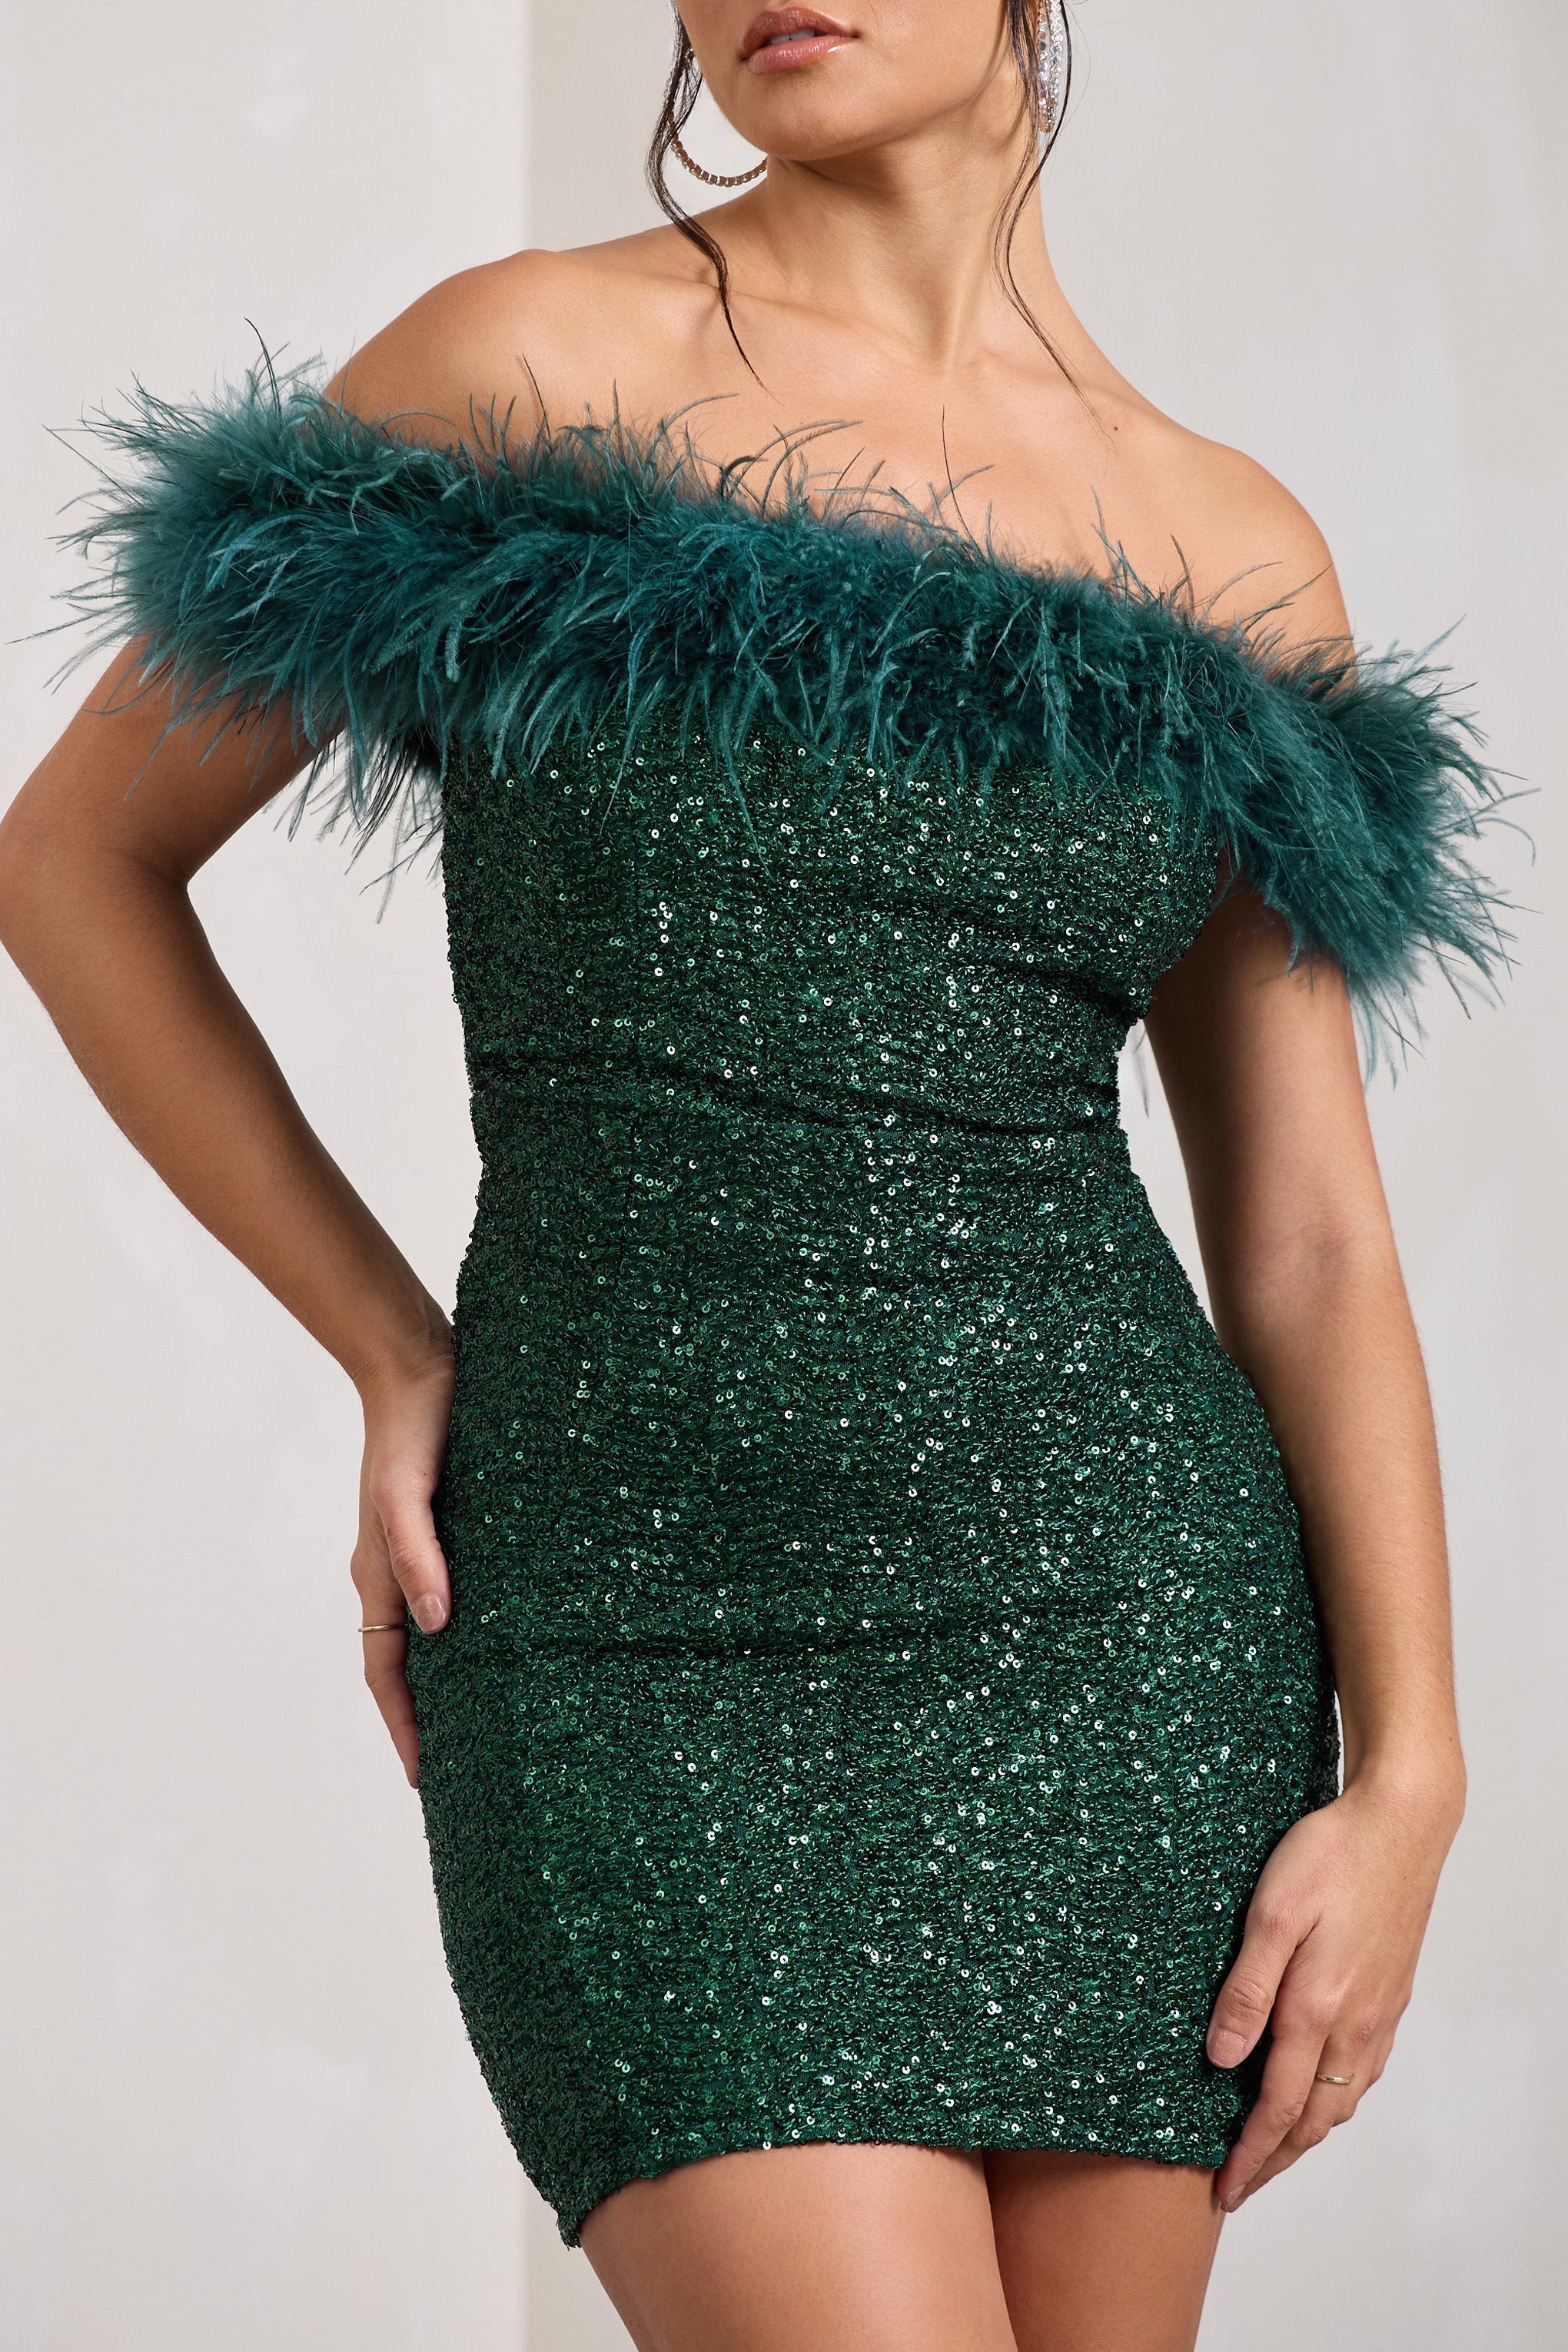 New Money Green Bodycon Sequin Mini Dress With Feather Trim